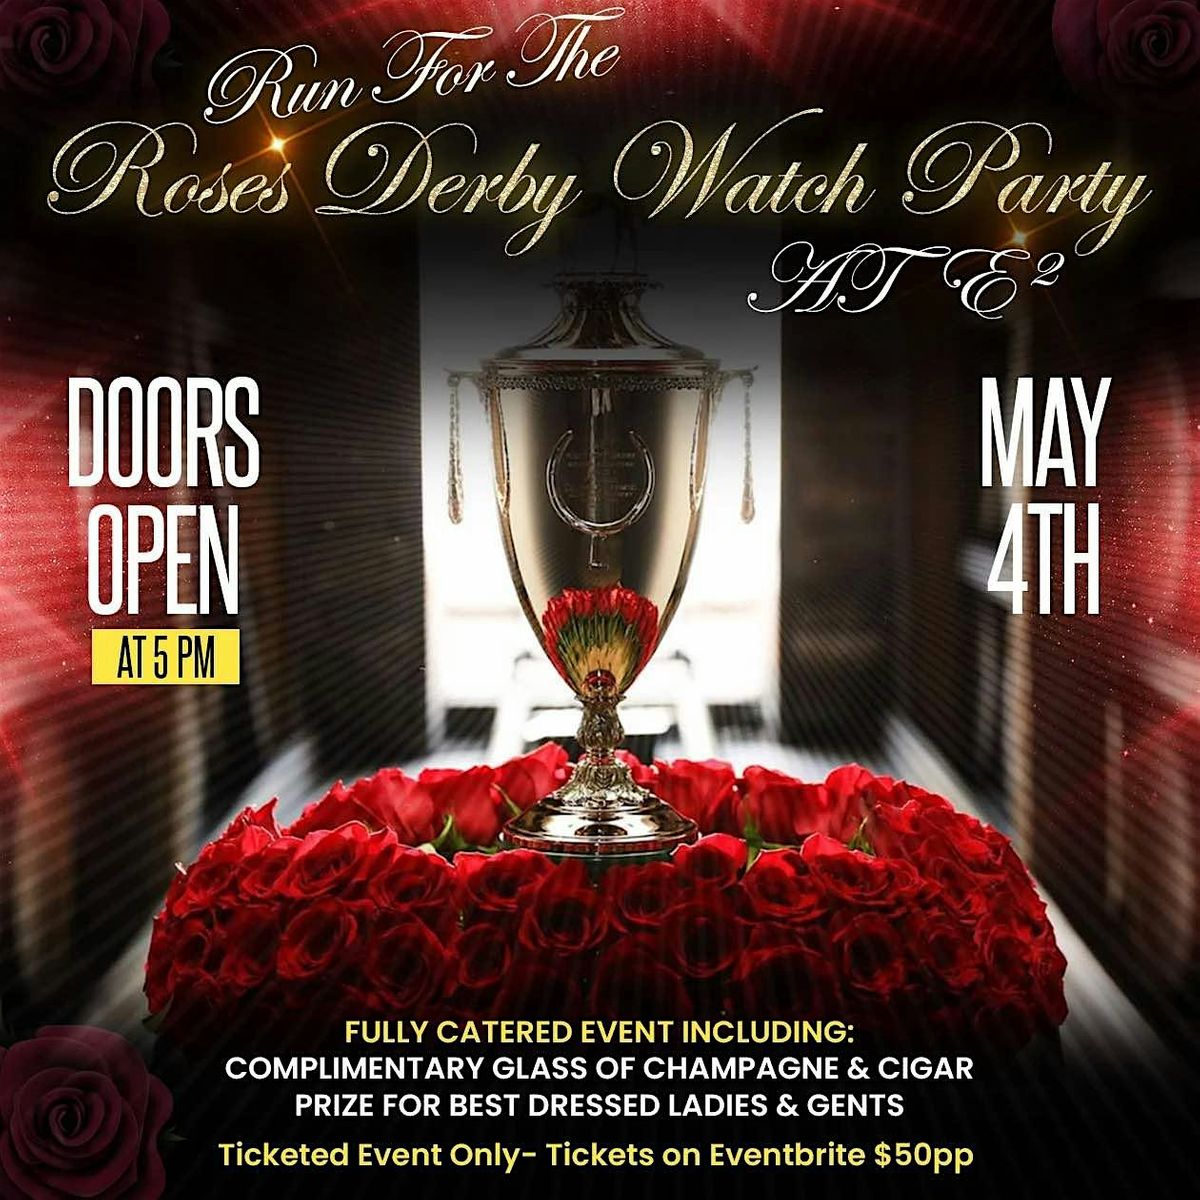 Run For The Roses Derby Watch Party